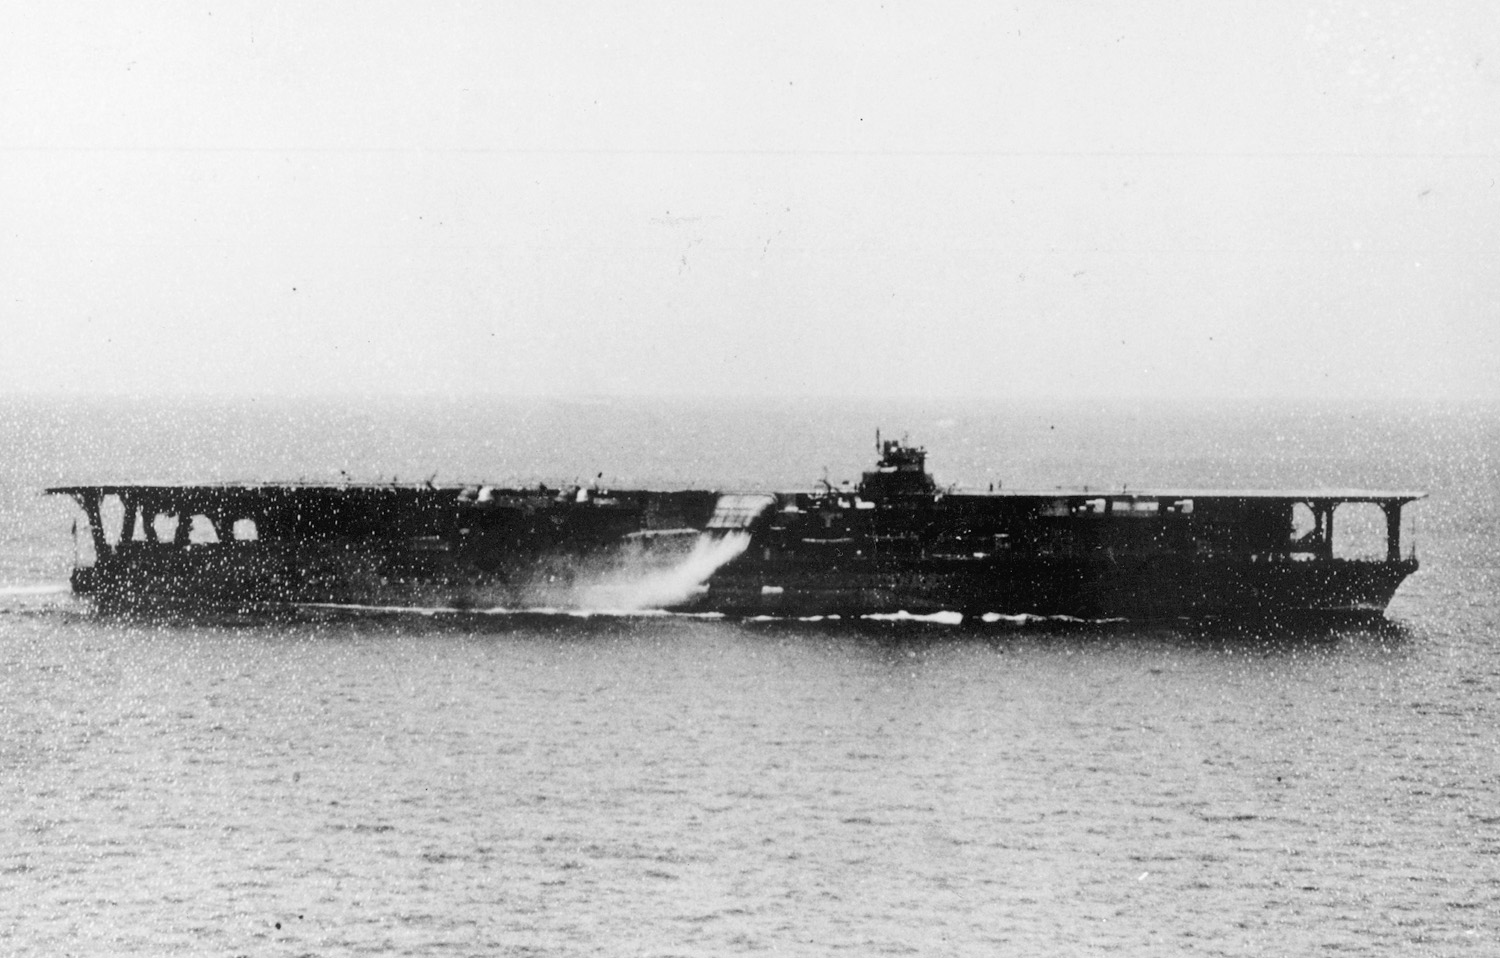 One of the carriers in the Japanese Fleet that attacked Pearl Harbor was Hiryu, here seen burning on June 5, 1942, during the Battle of Midway. 